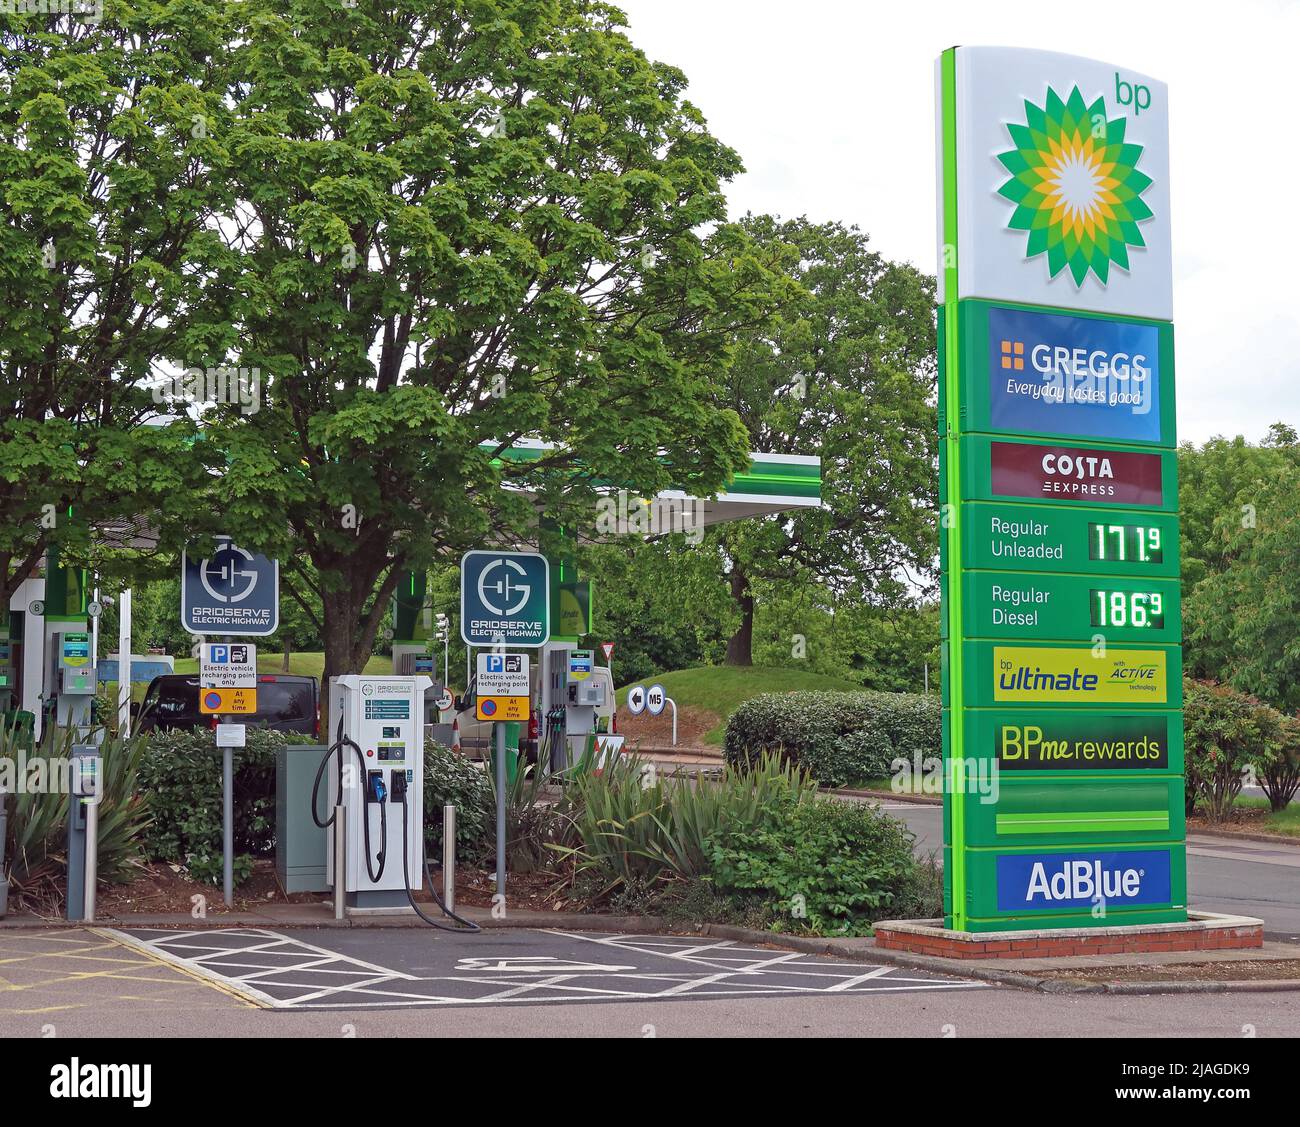 Frankley Services M5 northbound, BP service station petrol prices, diesel prices, with Greggs,Adblue, next to Gridserve Electric Highway charging Stock Photo